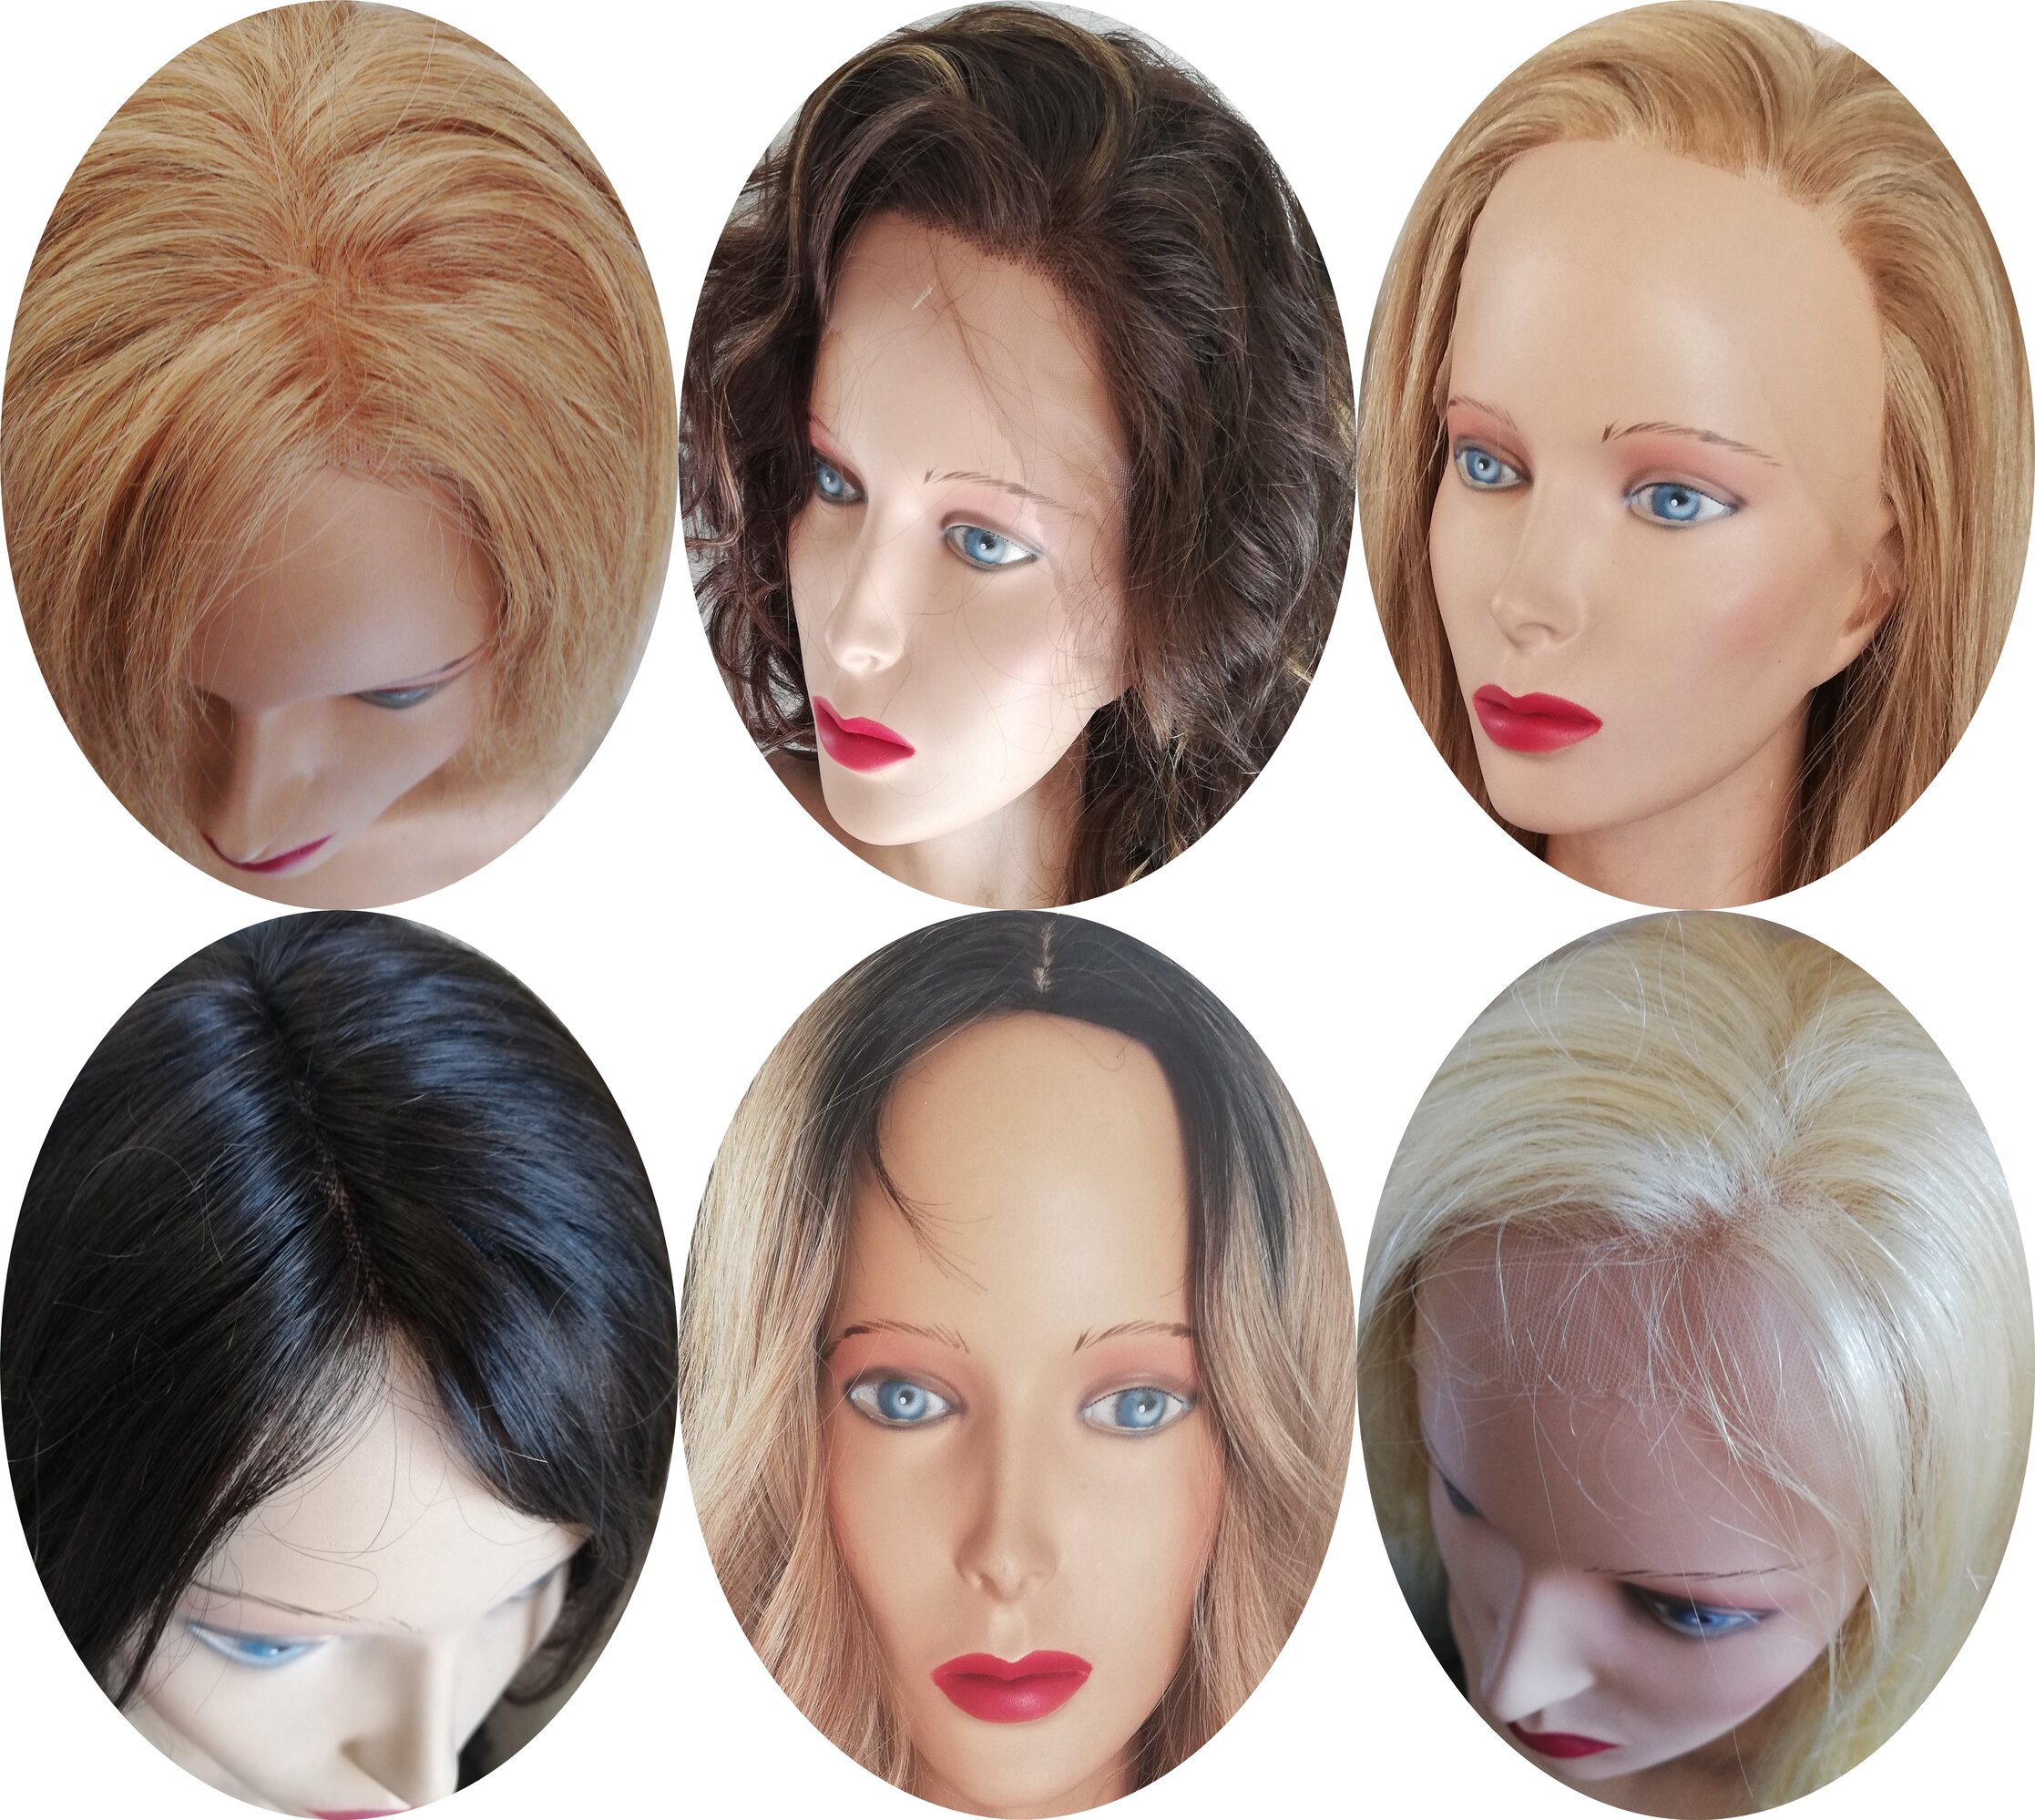 Types of Wig making techniques